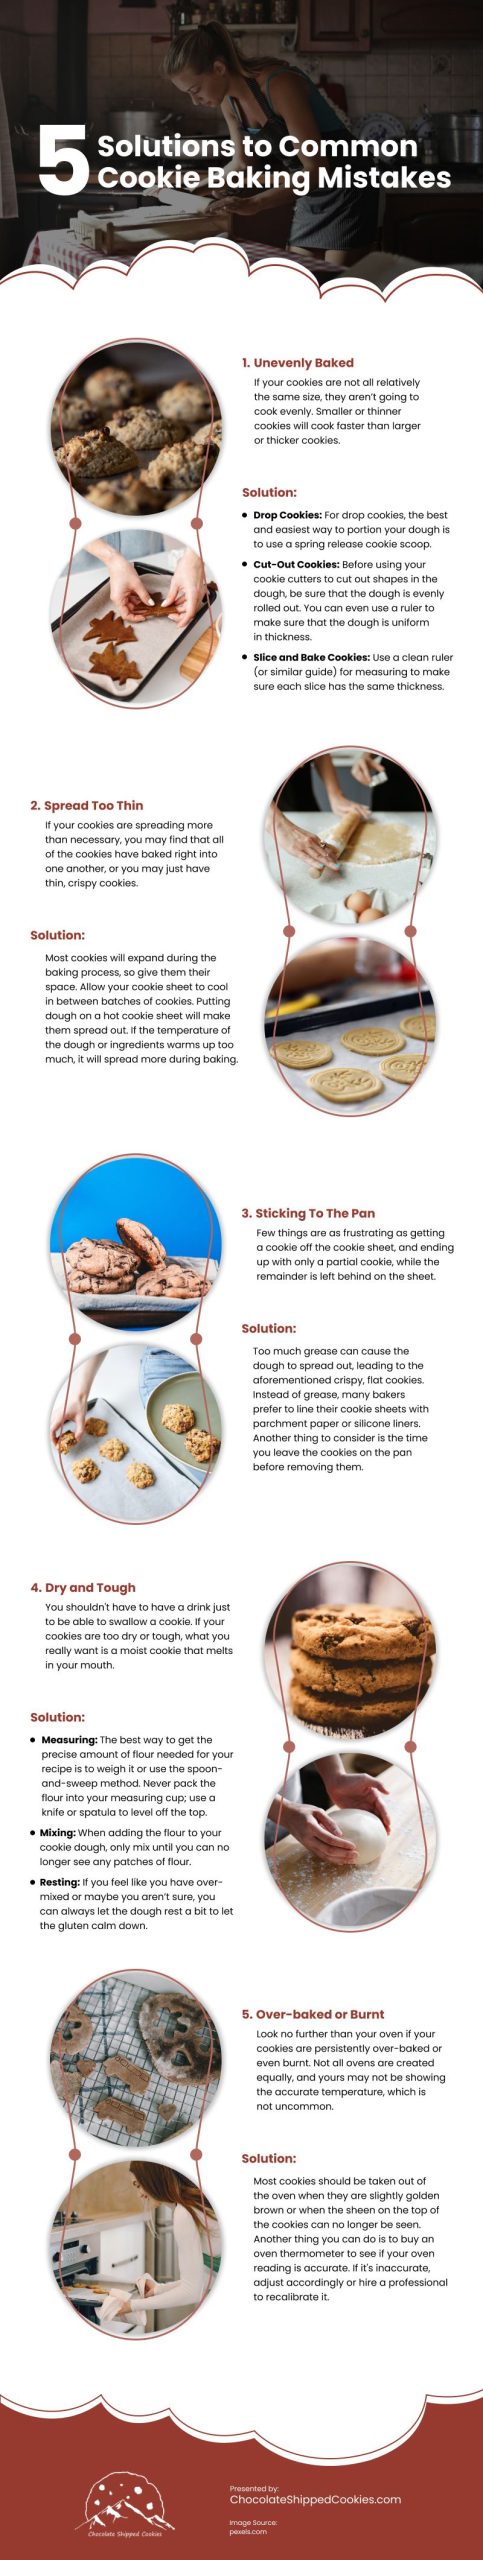 5 Solutions to Common Cookie Baking Mistakes Infographic